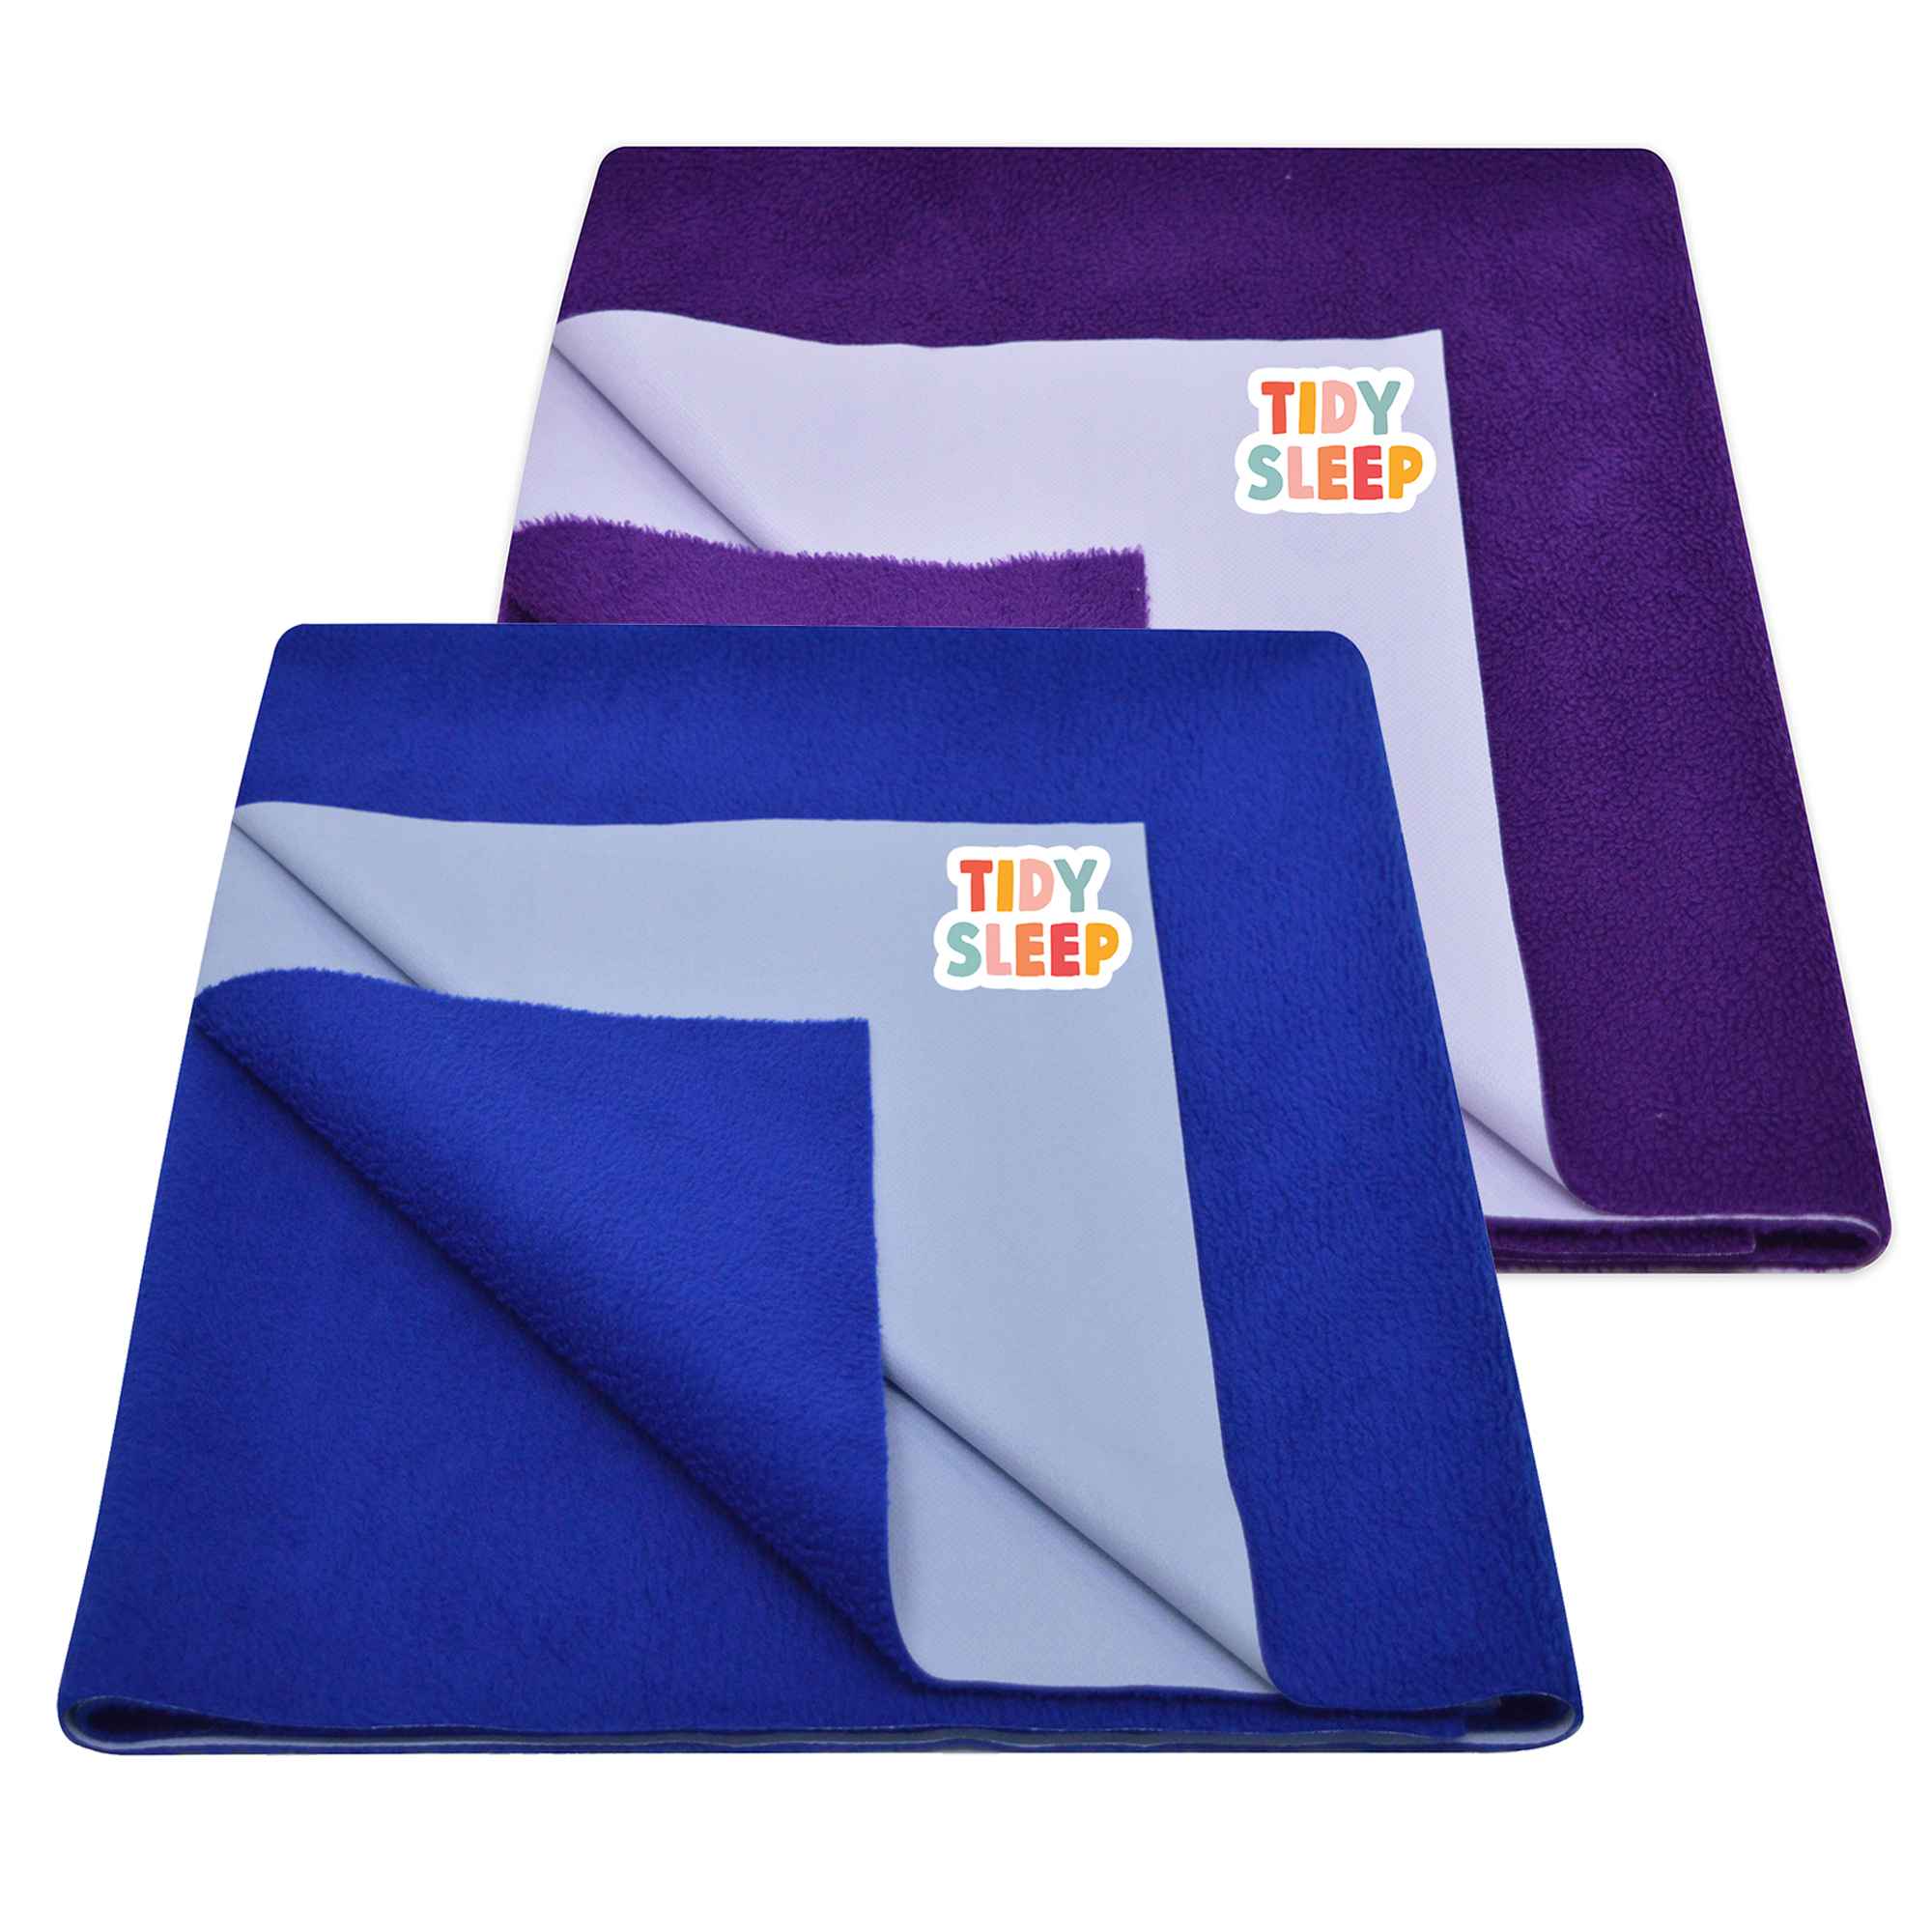 Waterproof Baby Bed Protector Dry Sheet For New Born Babies -Royal Blue & Plum Pack Of 2